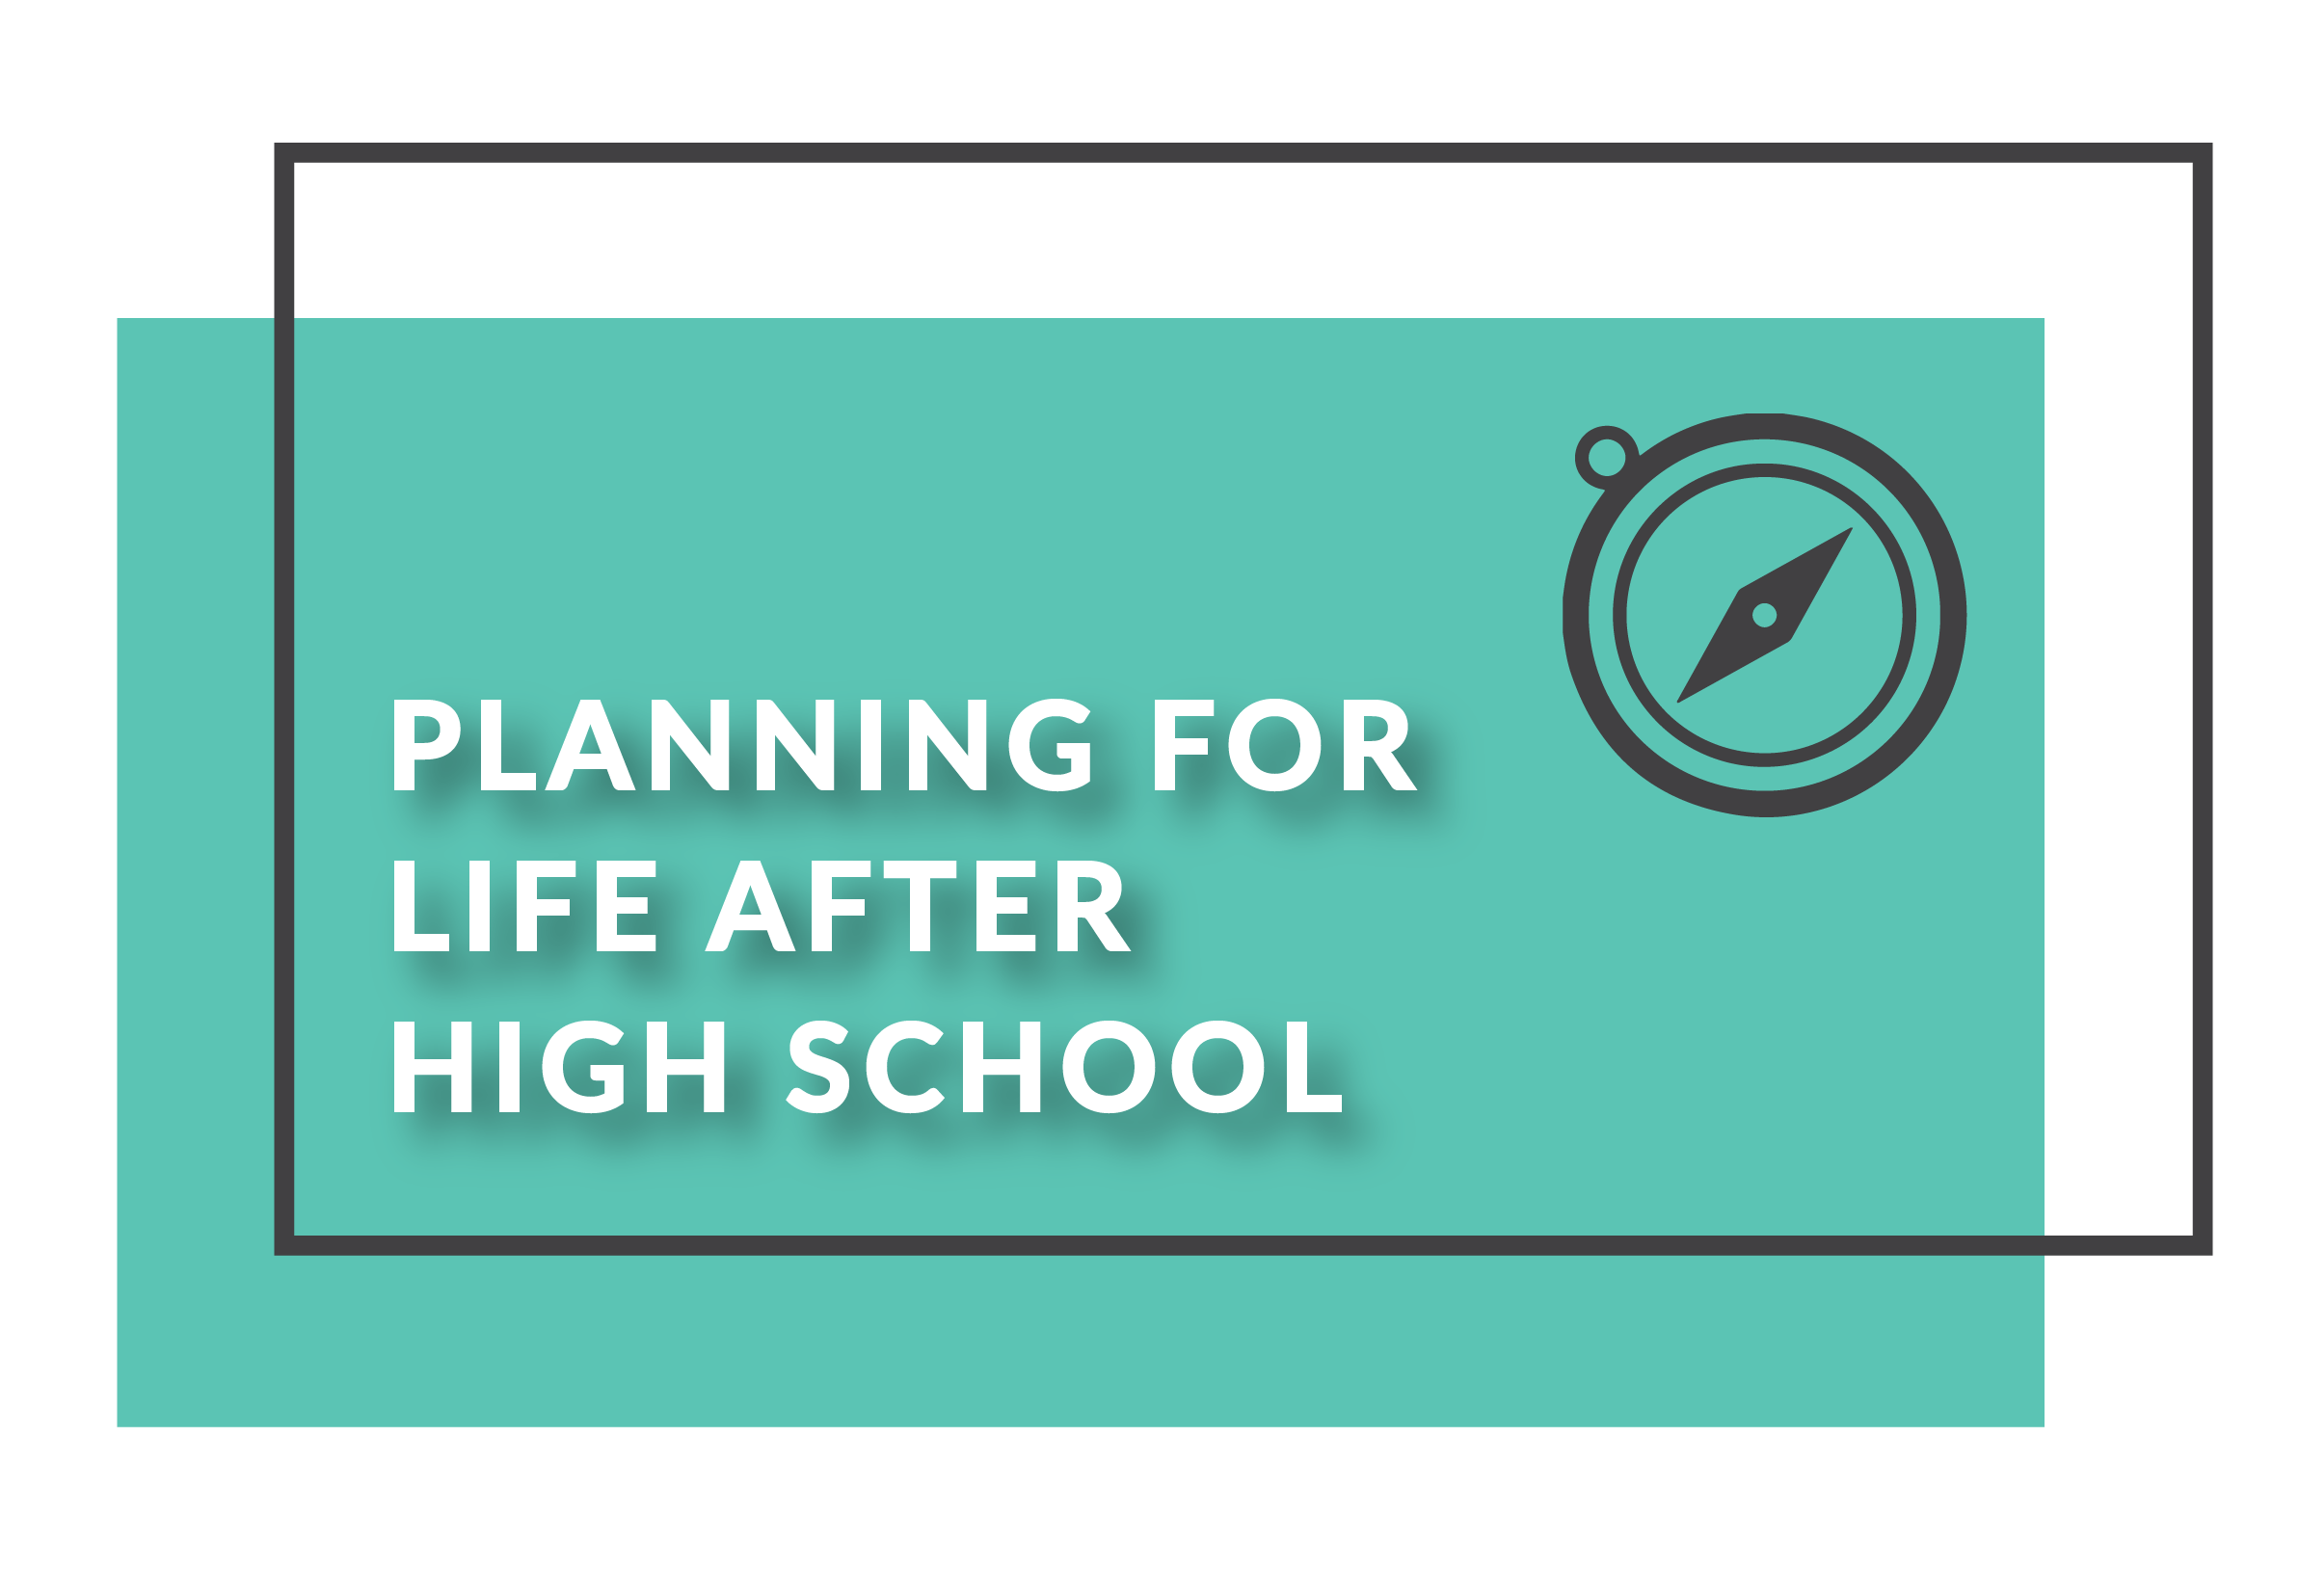 Planning for life after high school resources